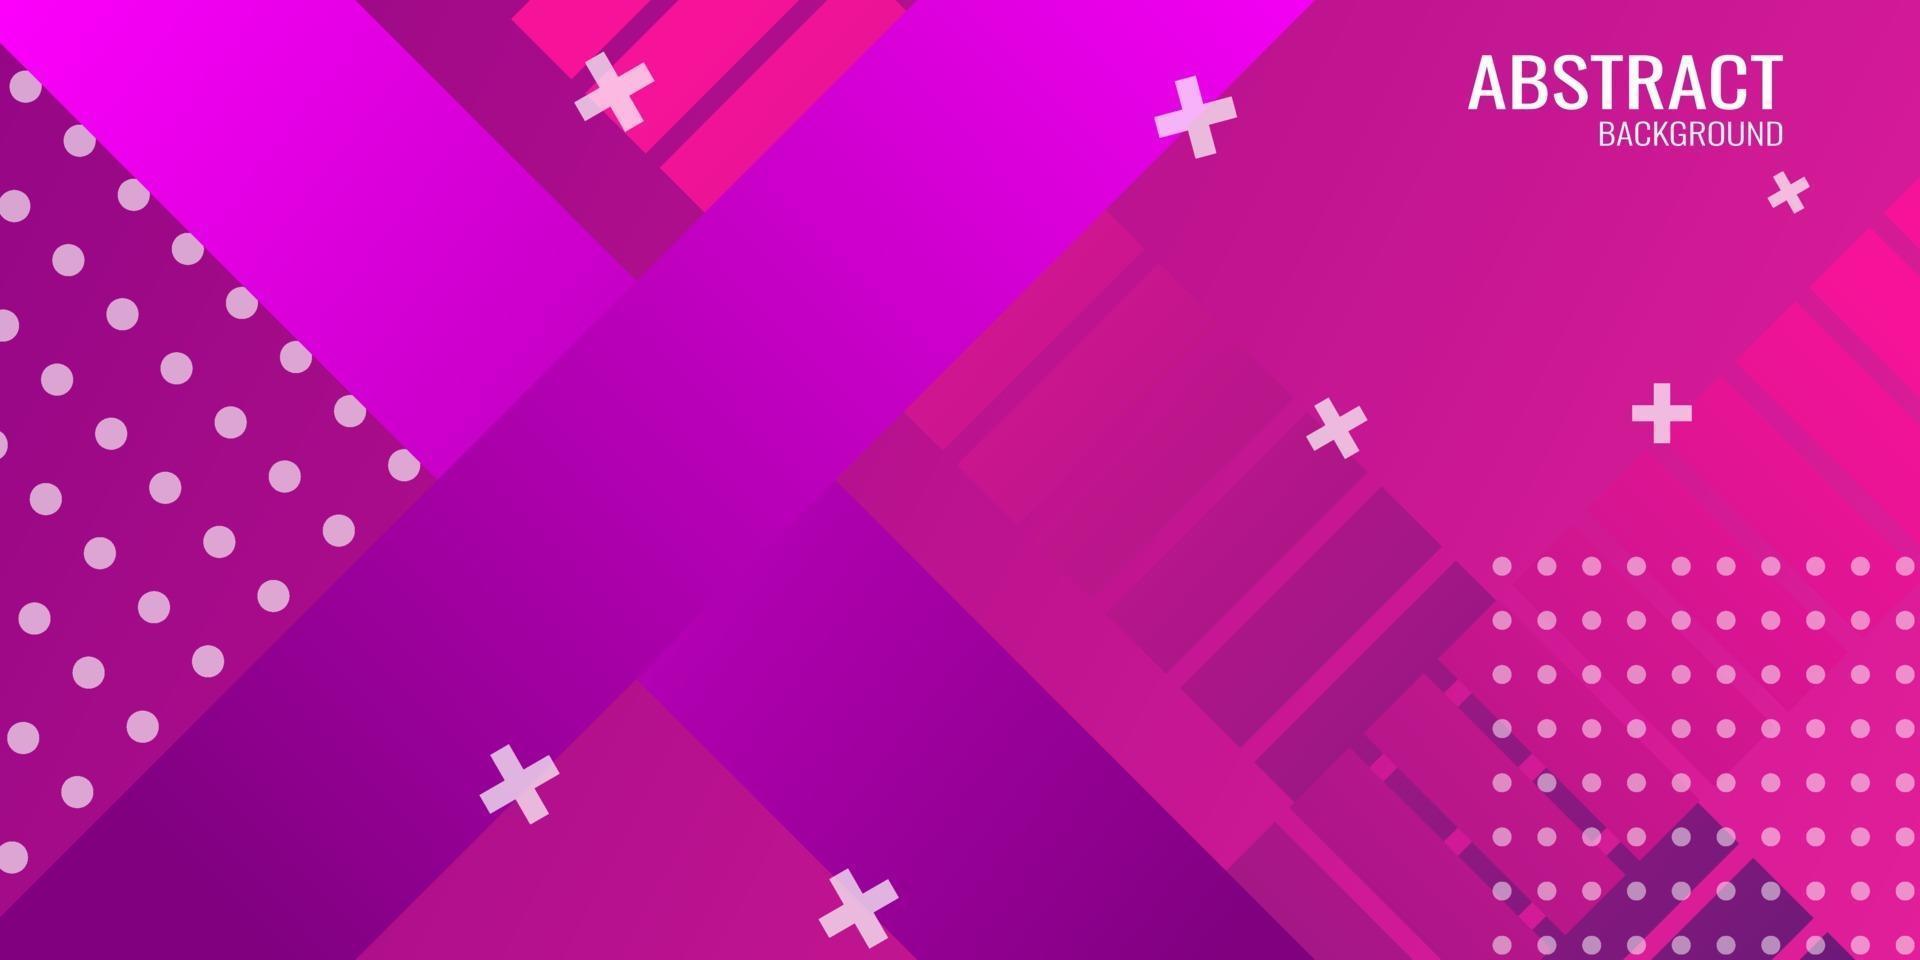 Abstract geometric background in purple gradient vector